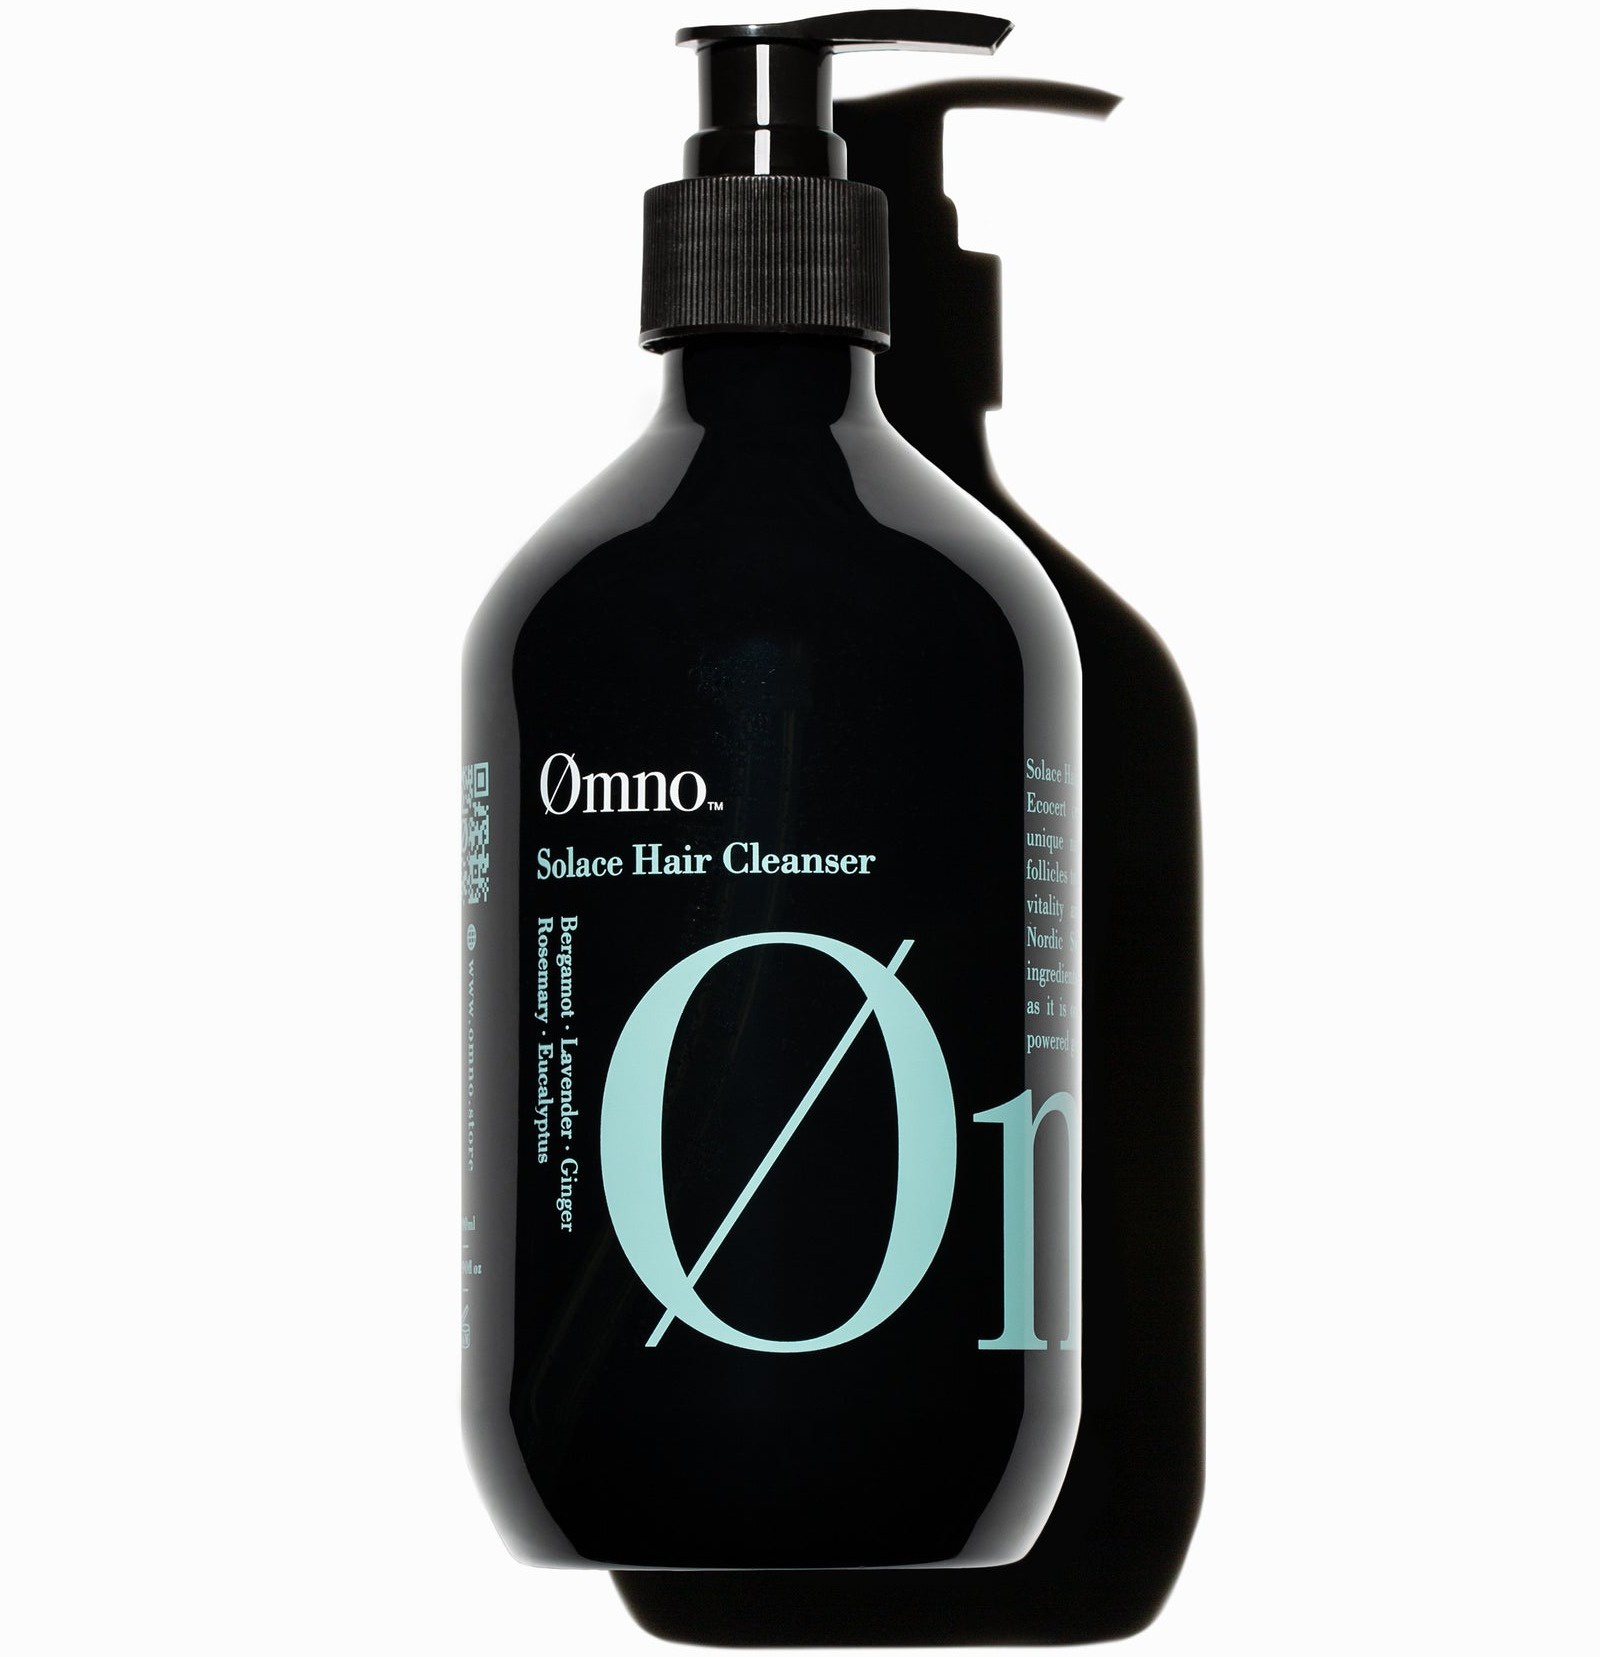 Omno Solace Hair Cleanser